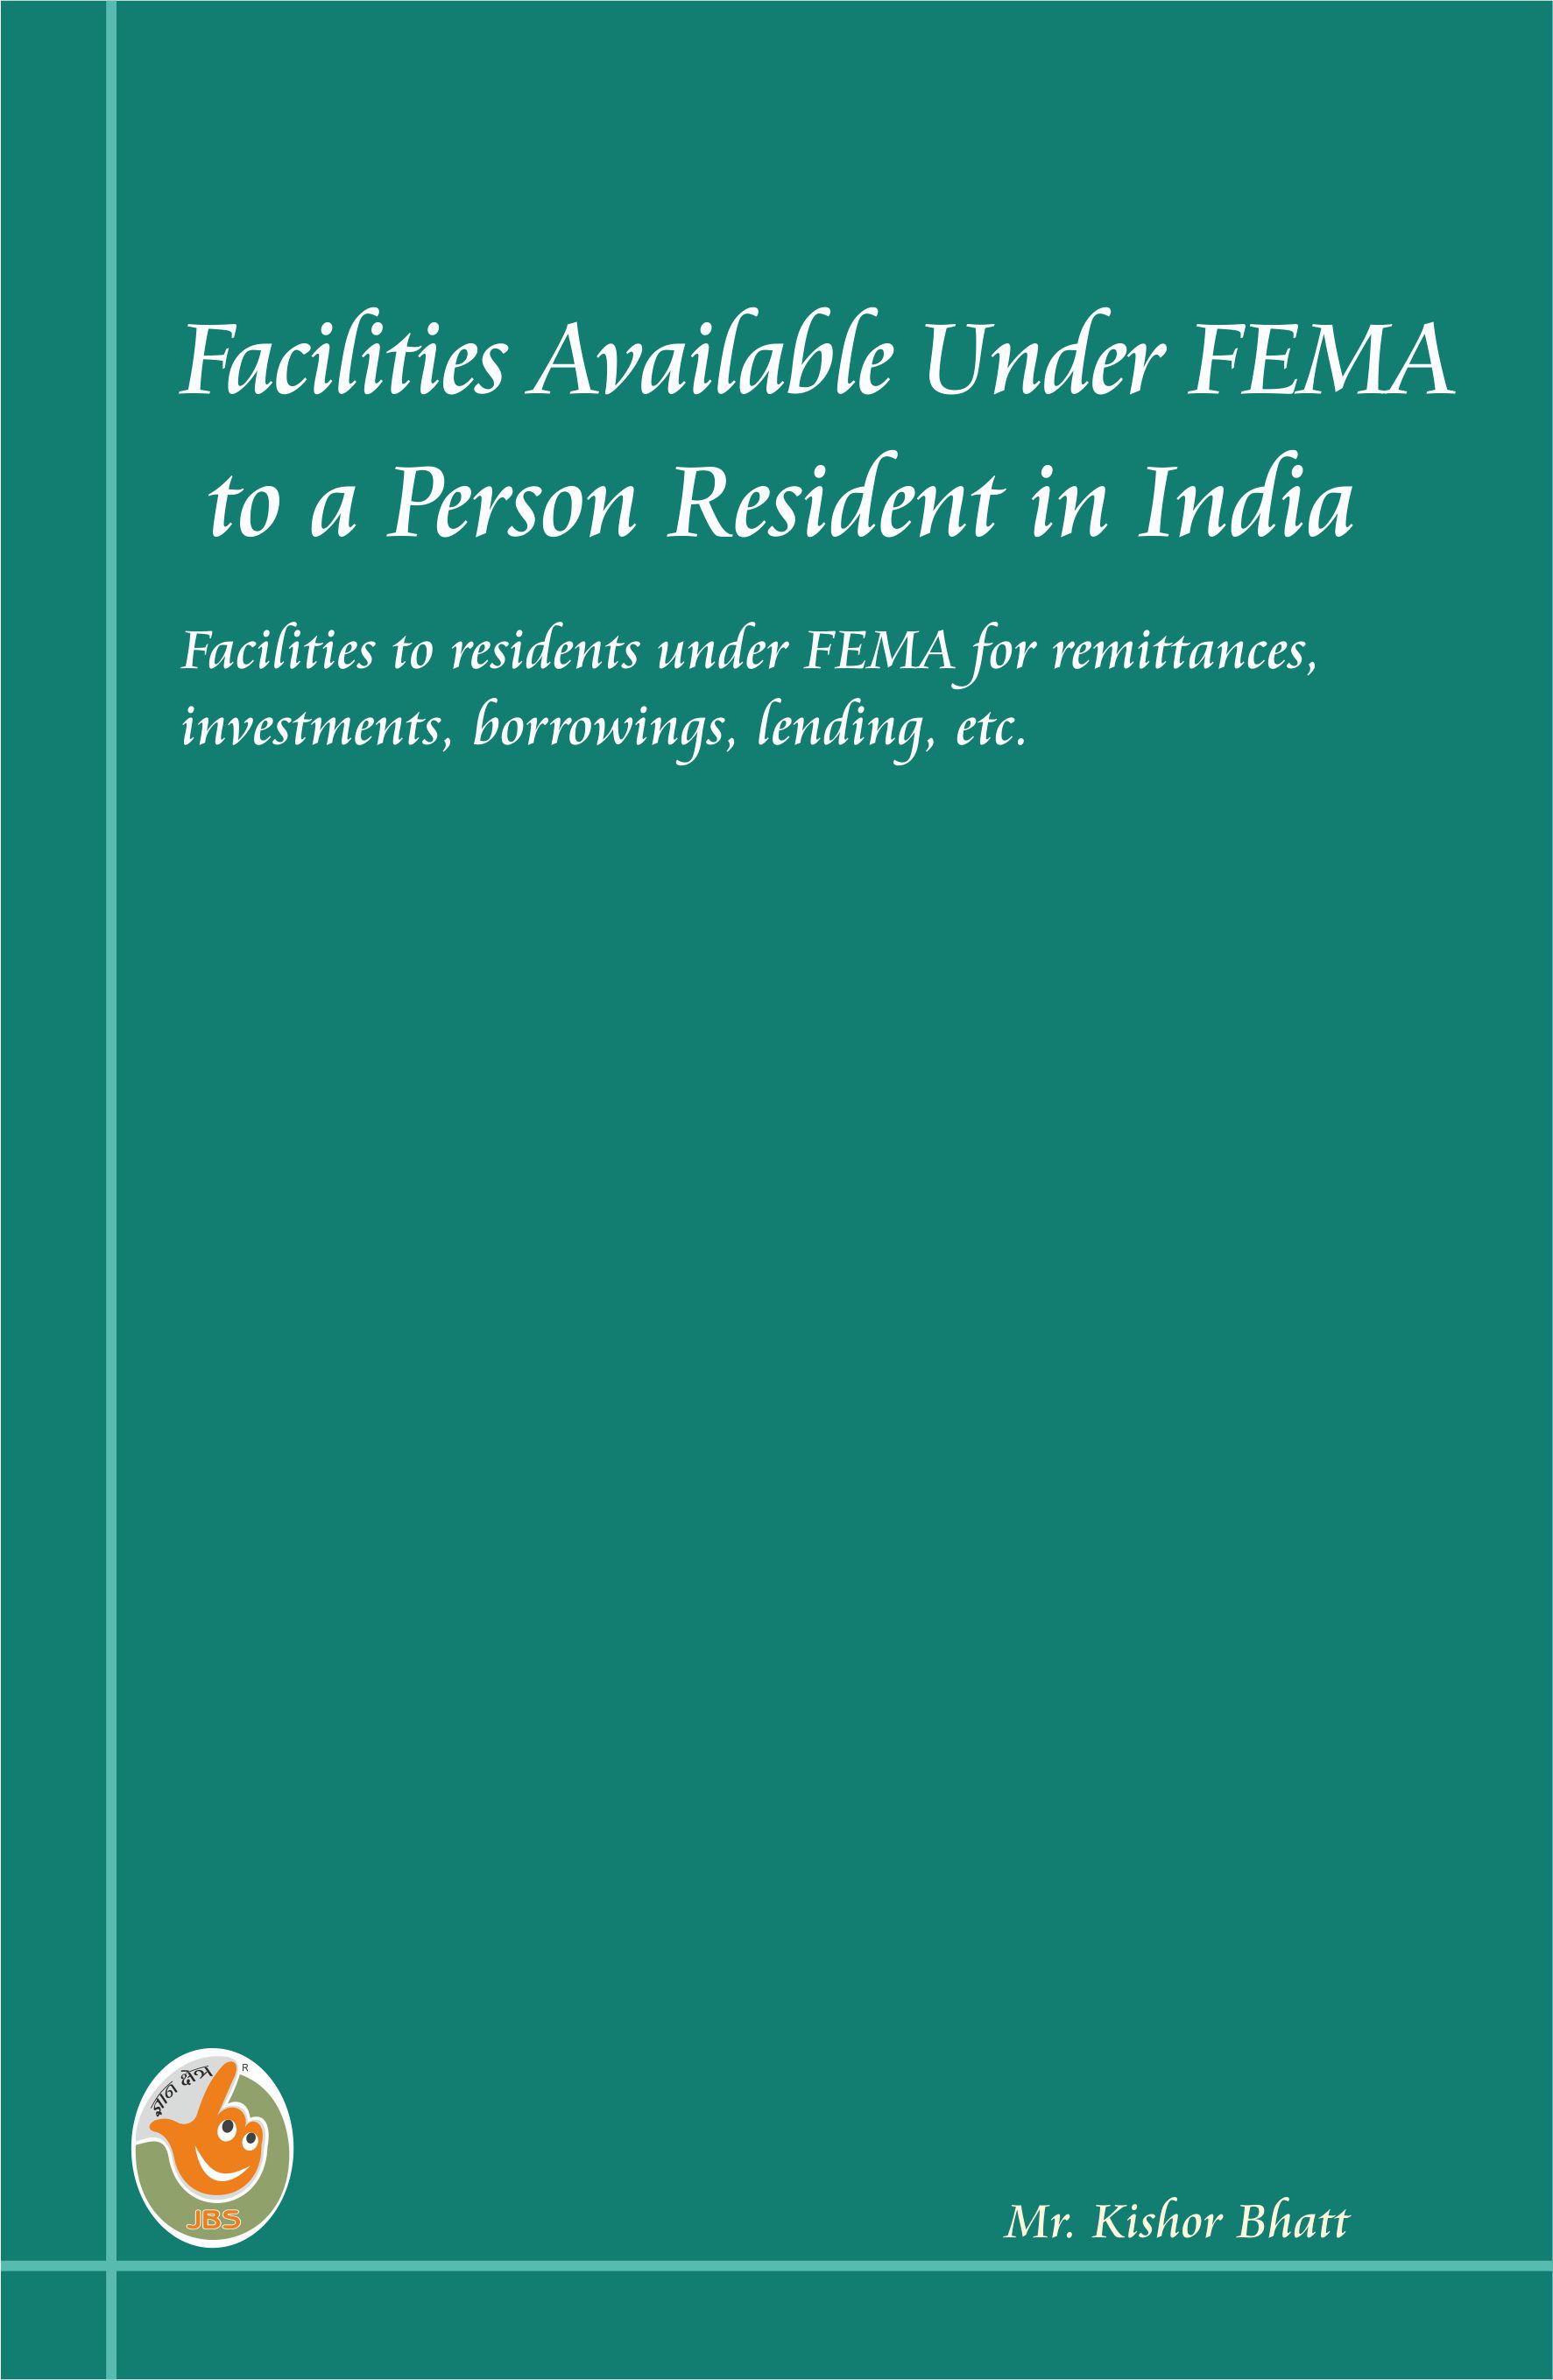 Facilities Available Under FEMA to a Person Residnet in India